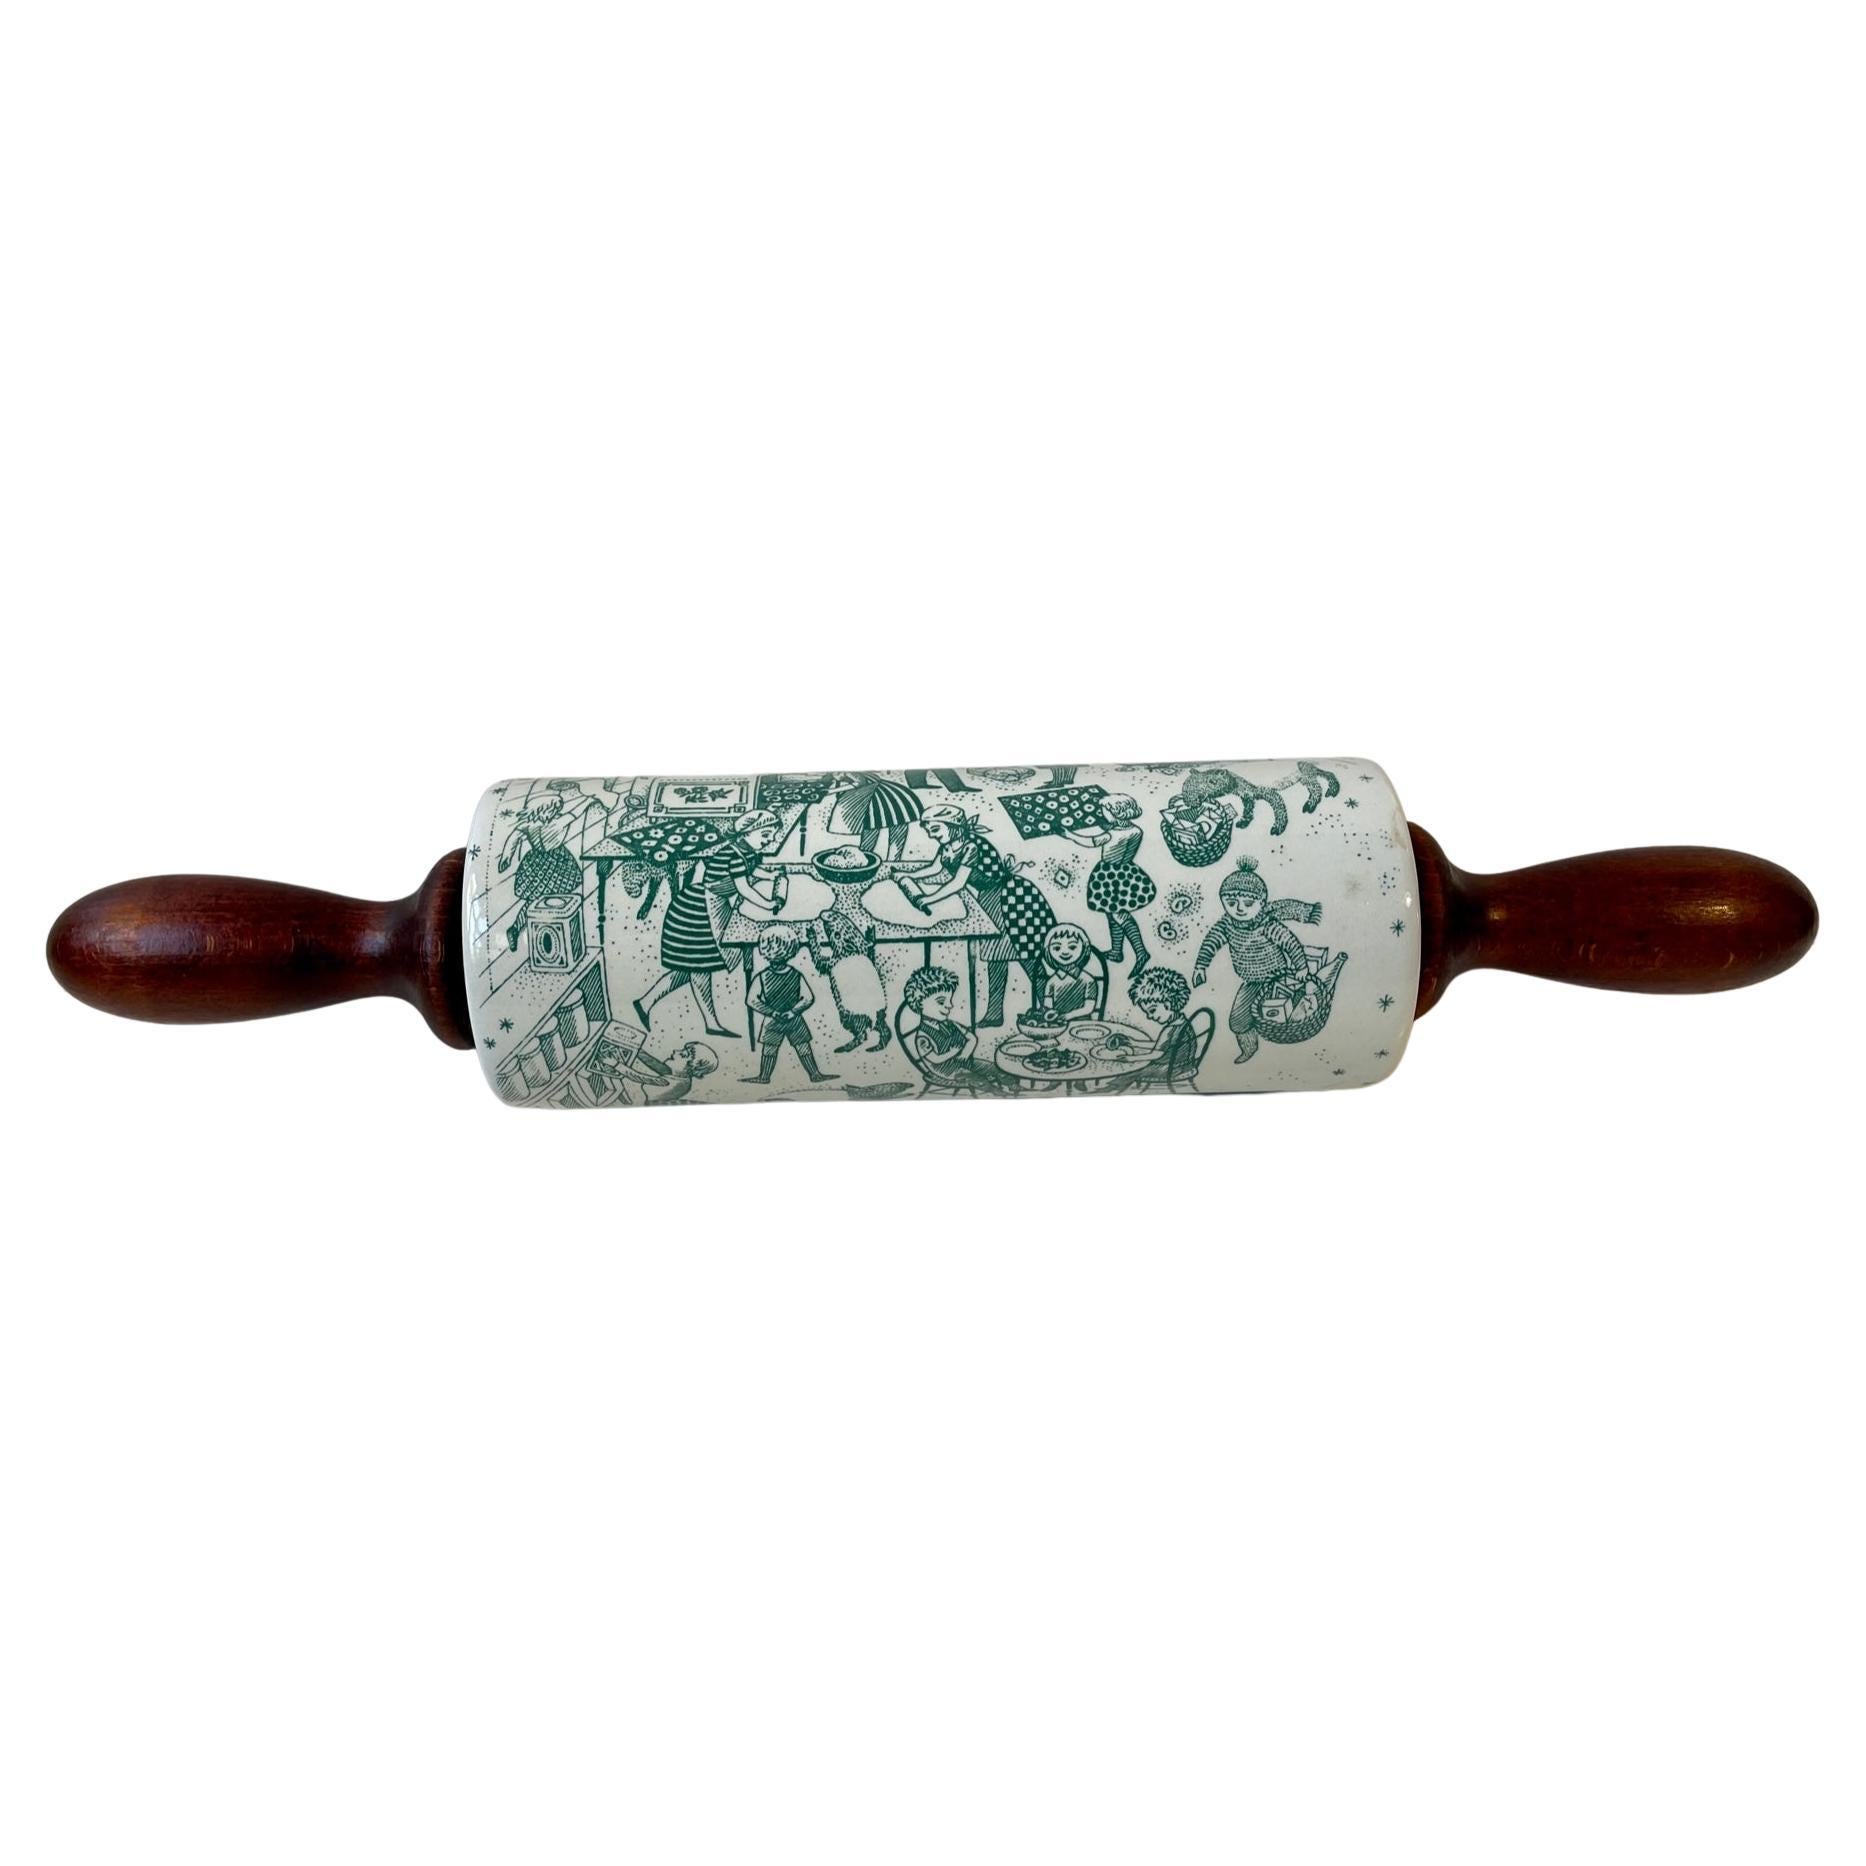 A very rare rolling pin fashioned from glazed porcelain and patinated oak. Its green motif is a micro-cosmos of a kitchen kaos. Very humorous, peculiar and funny especially given its age. It was designed by the Danish artist Paul Høyrup Jørgensen